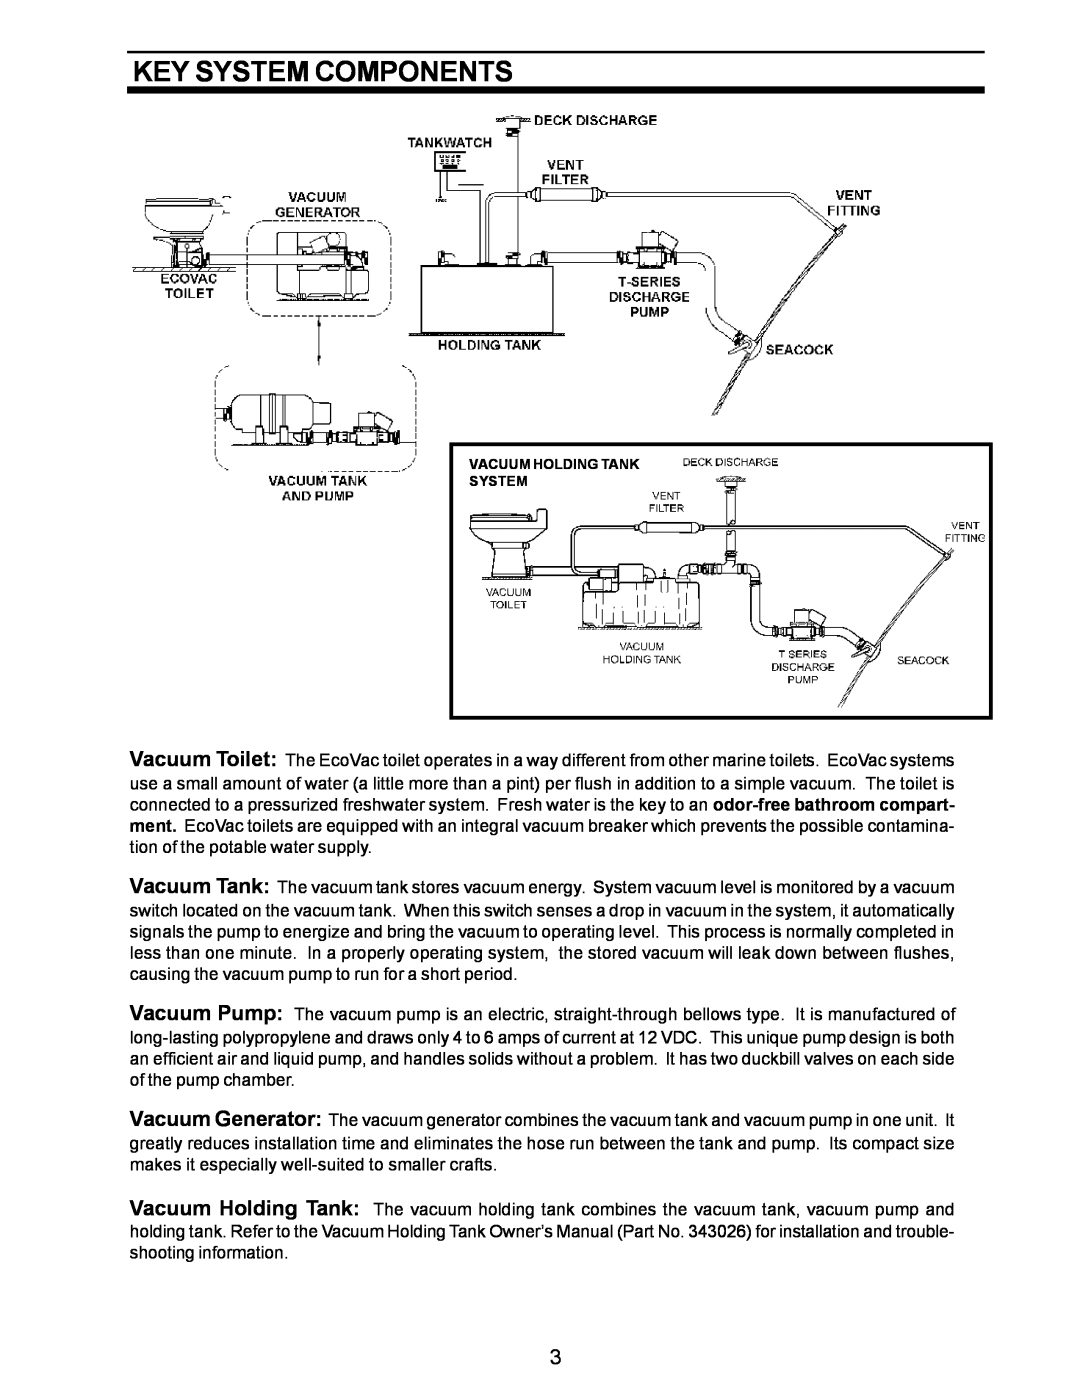 Dometic SANITATION SYSTEM owner manual Key System Components, Vacuum Holding Tank System 